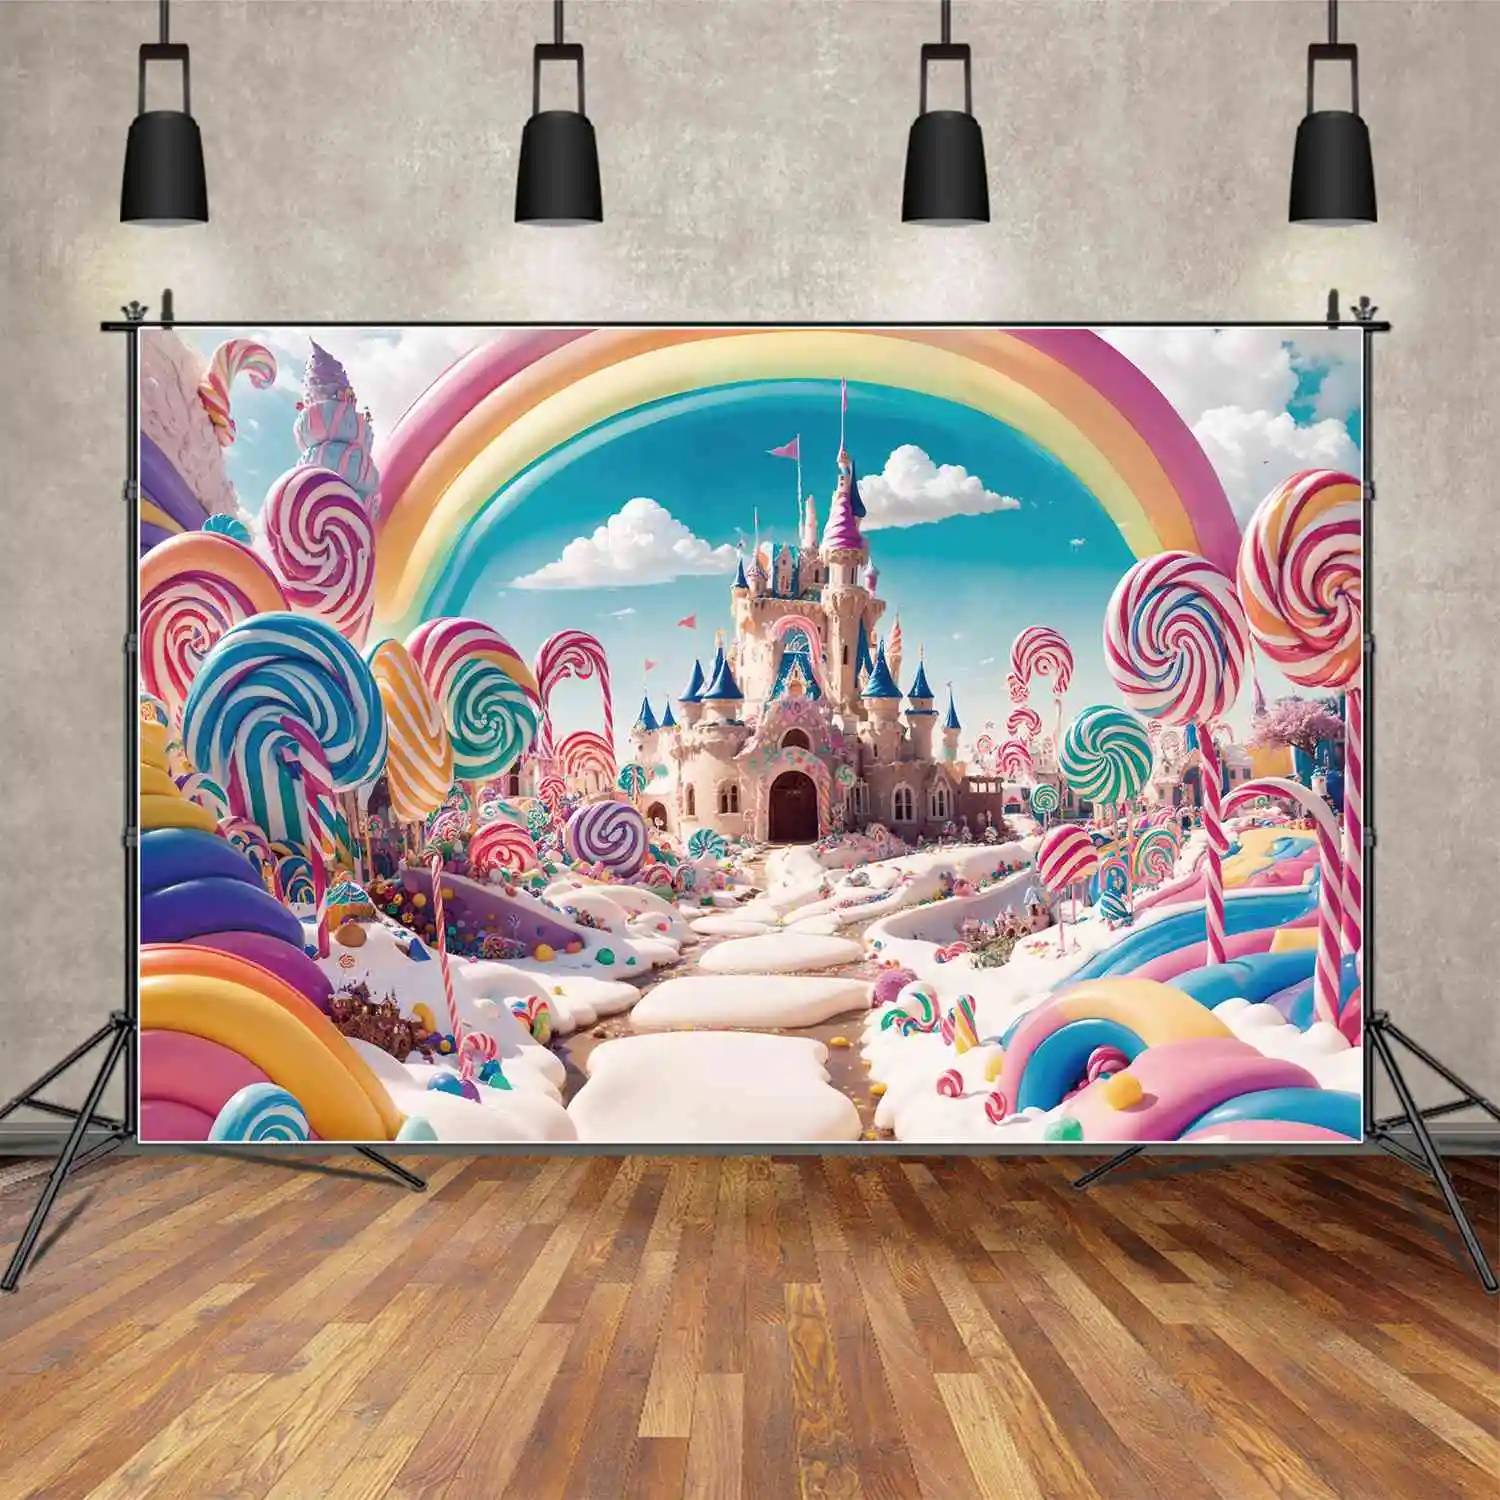 

Rainbow Castle Candyland Backdrops Photography Birthday Party Cream Custom Baby Photo Booth Photographic Backgrounds Props